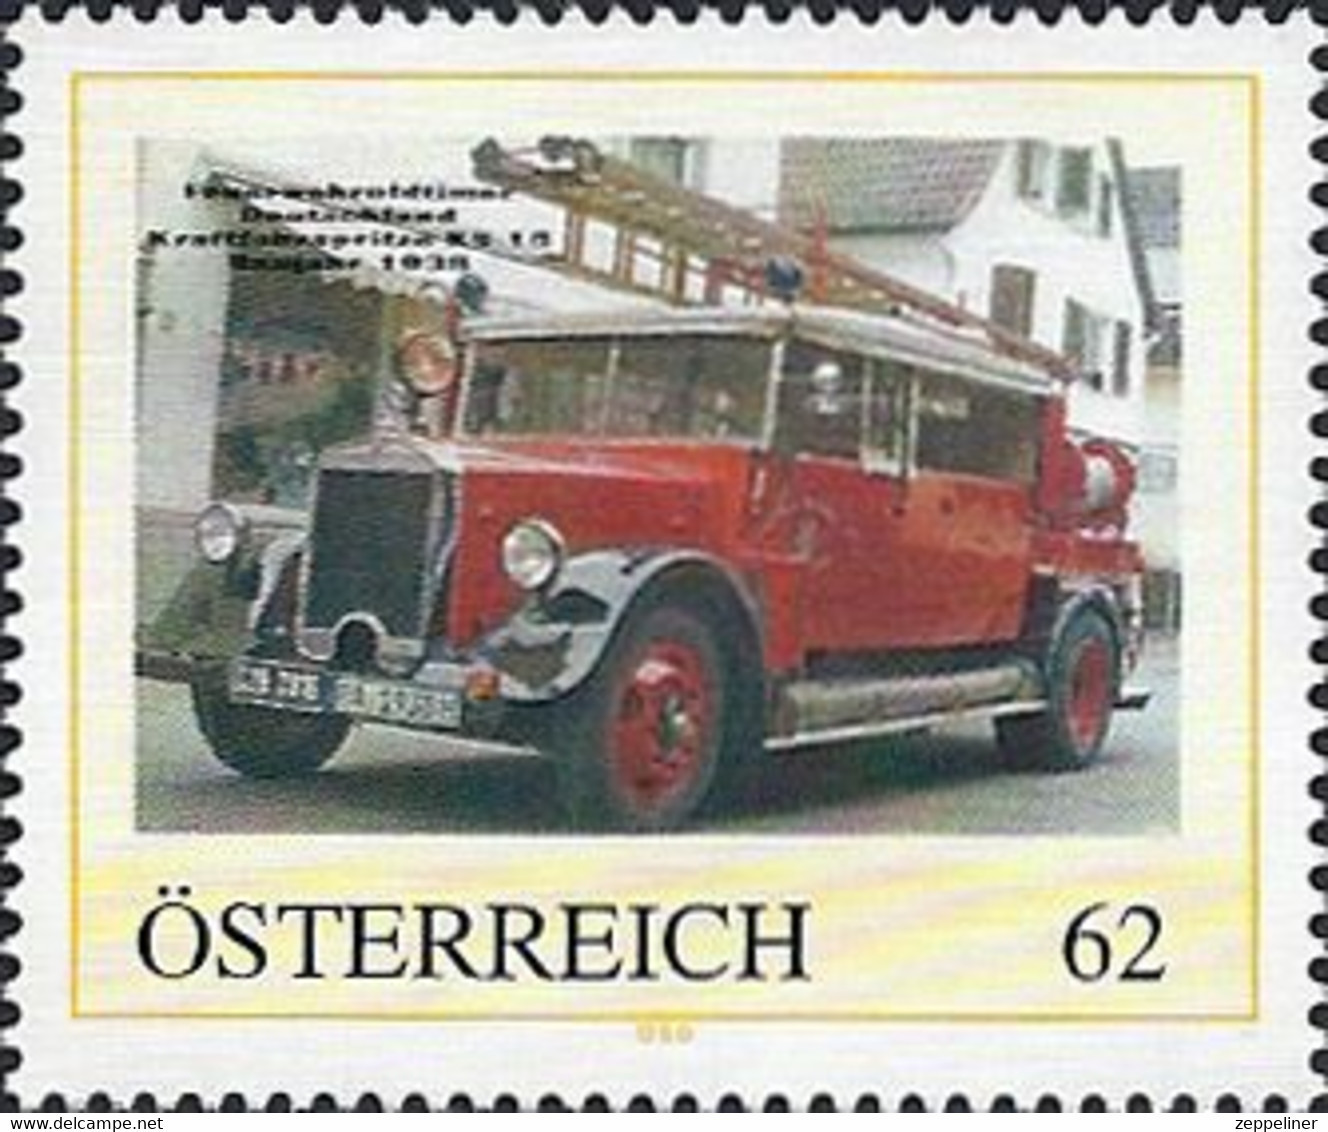 2006+ "Austria" Firetrucks, Feuerwehr, Cars, Private Issue, Low Edition! Only 200! LOOK! - Personnalized Stamps